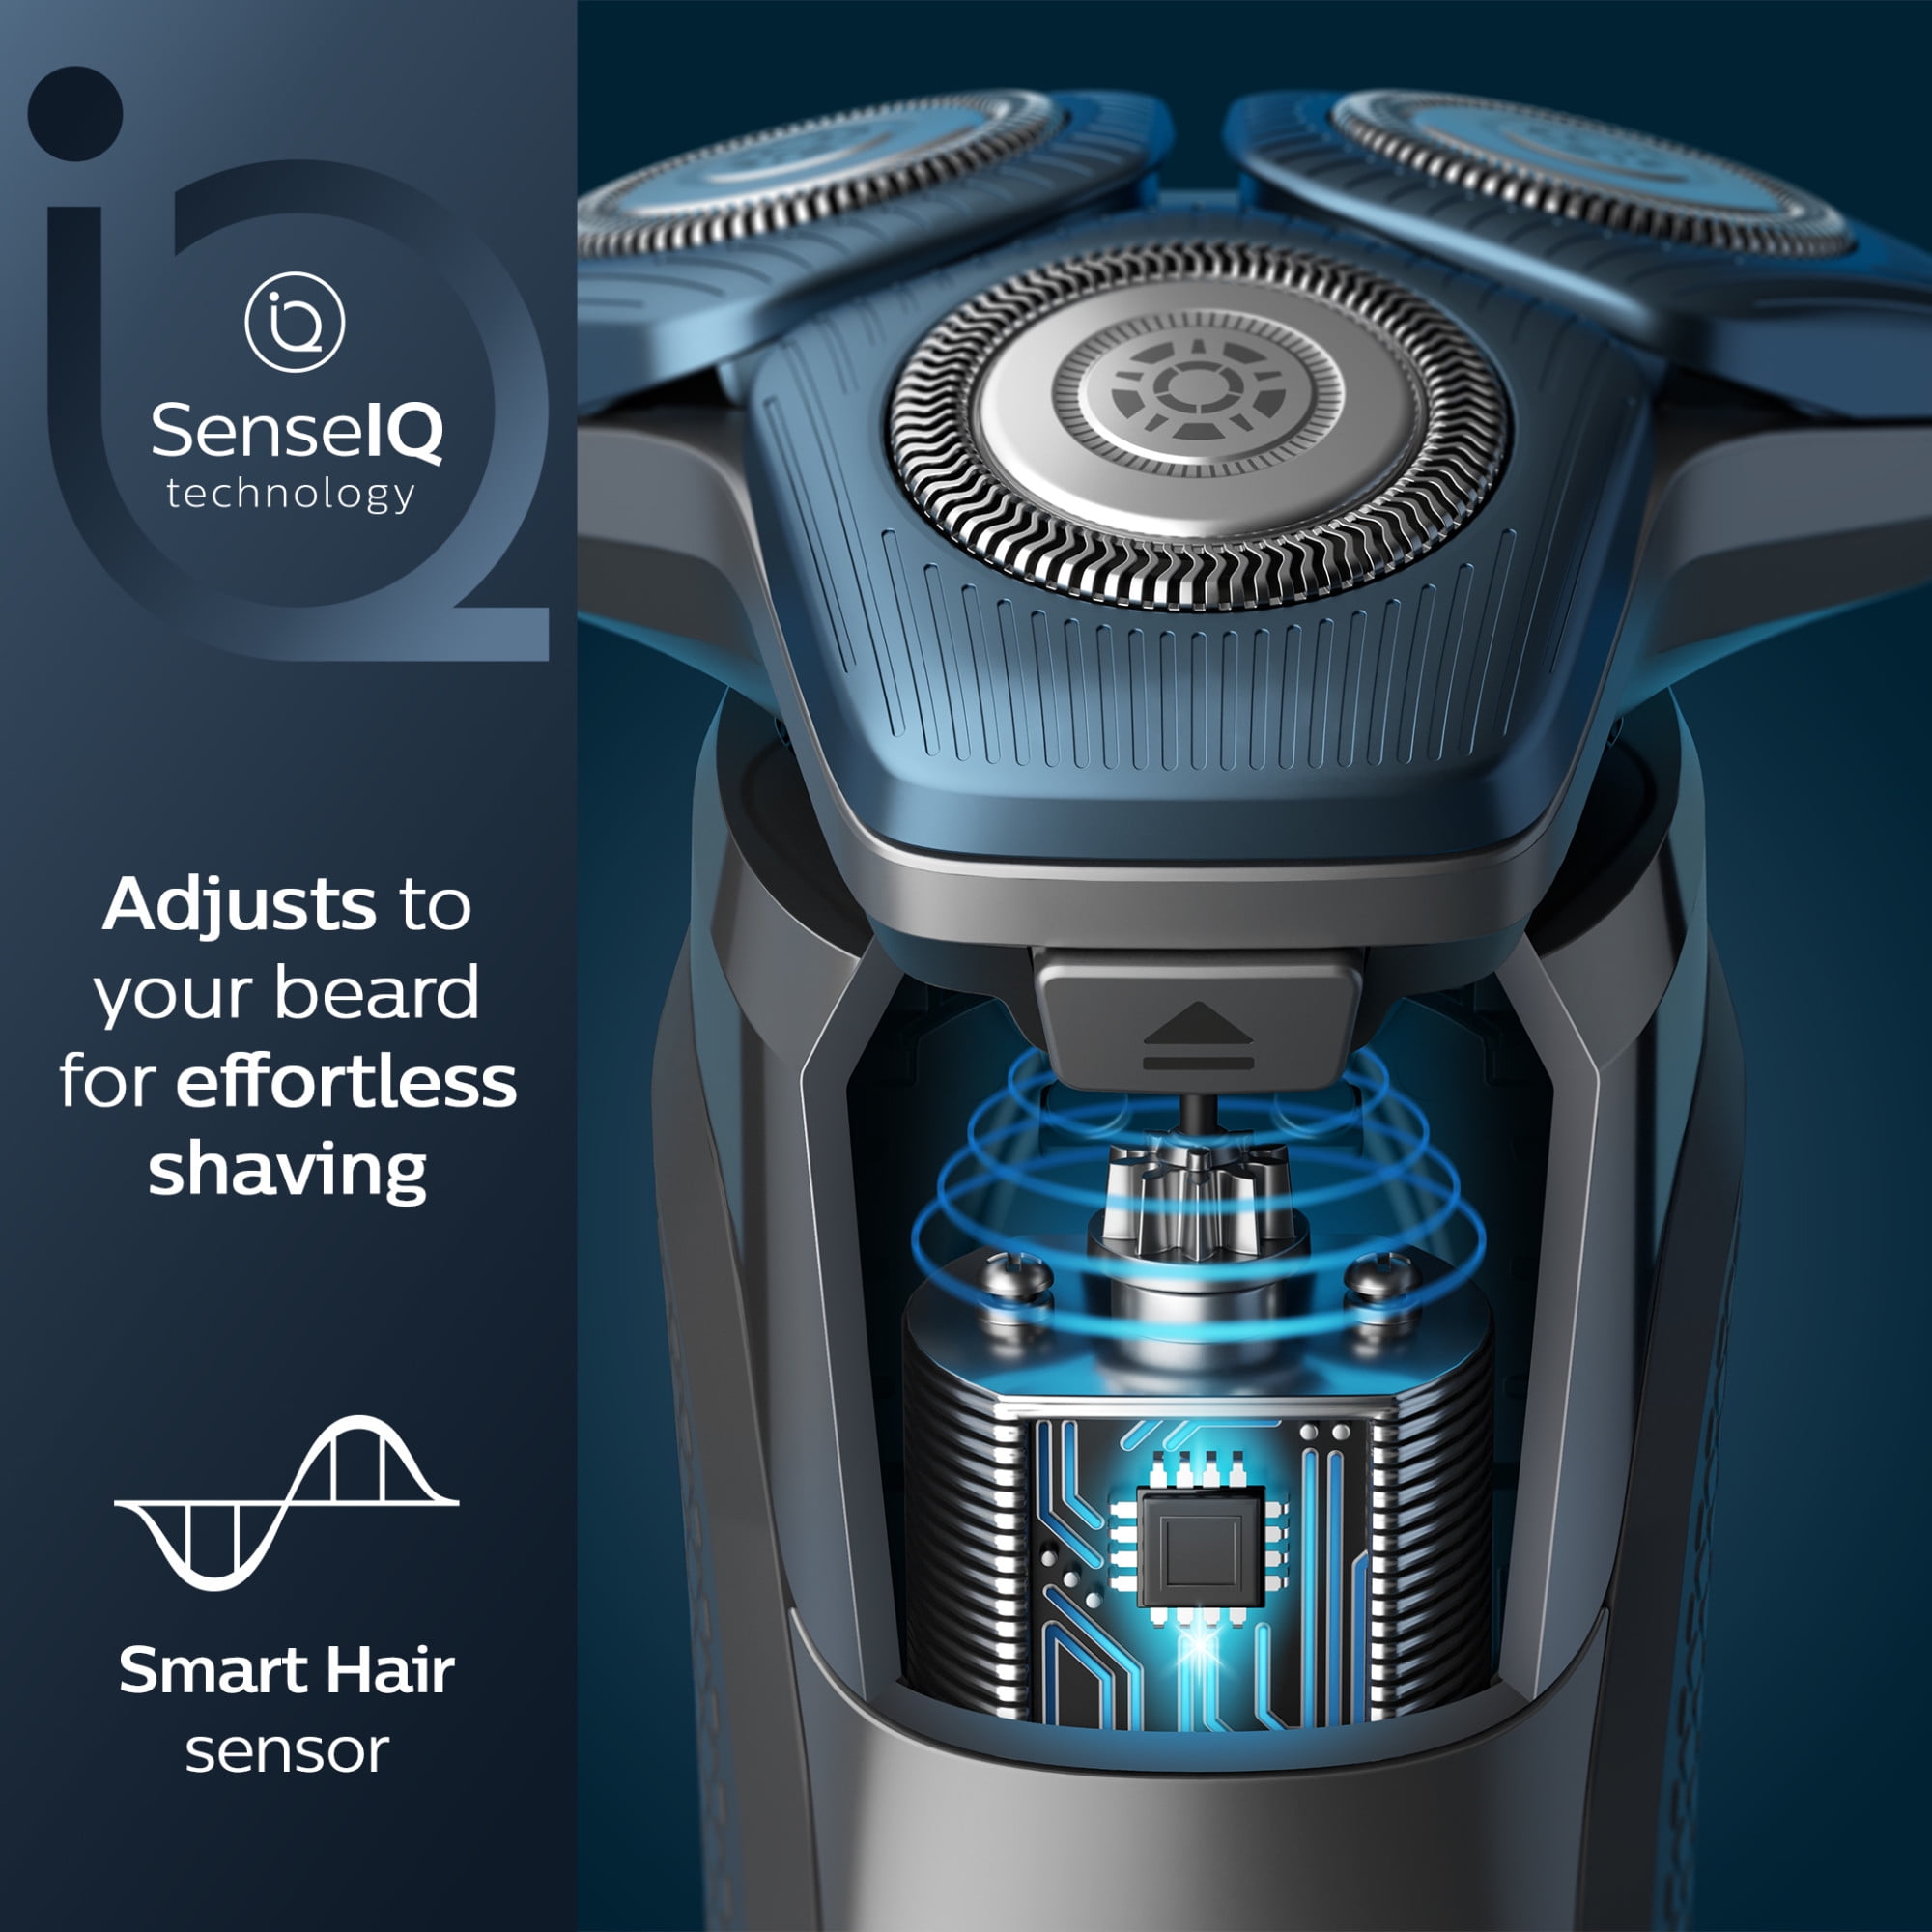 Shaver series 7000 Wet and Dry electric shaver S7783/78